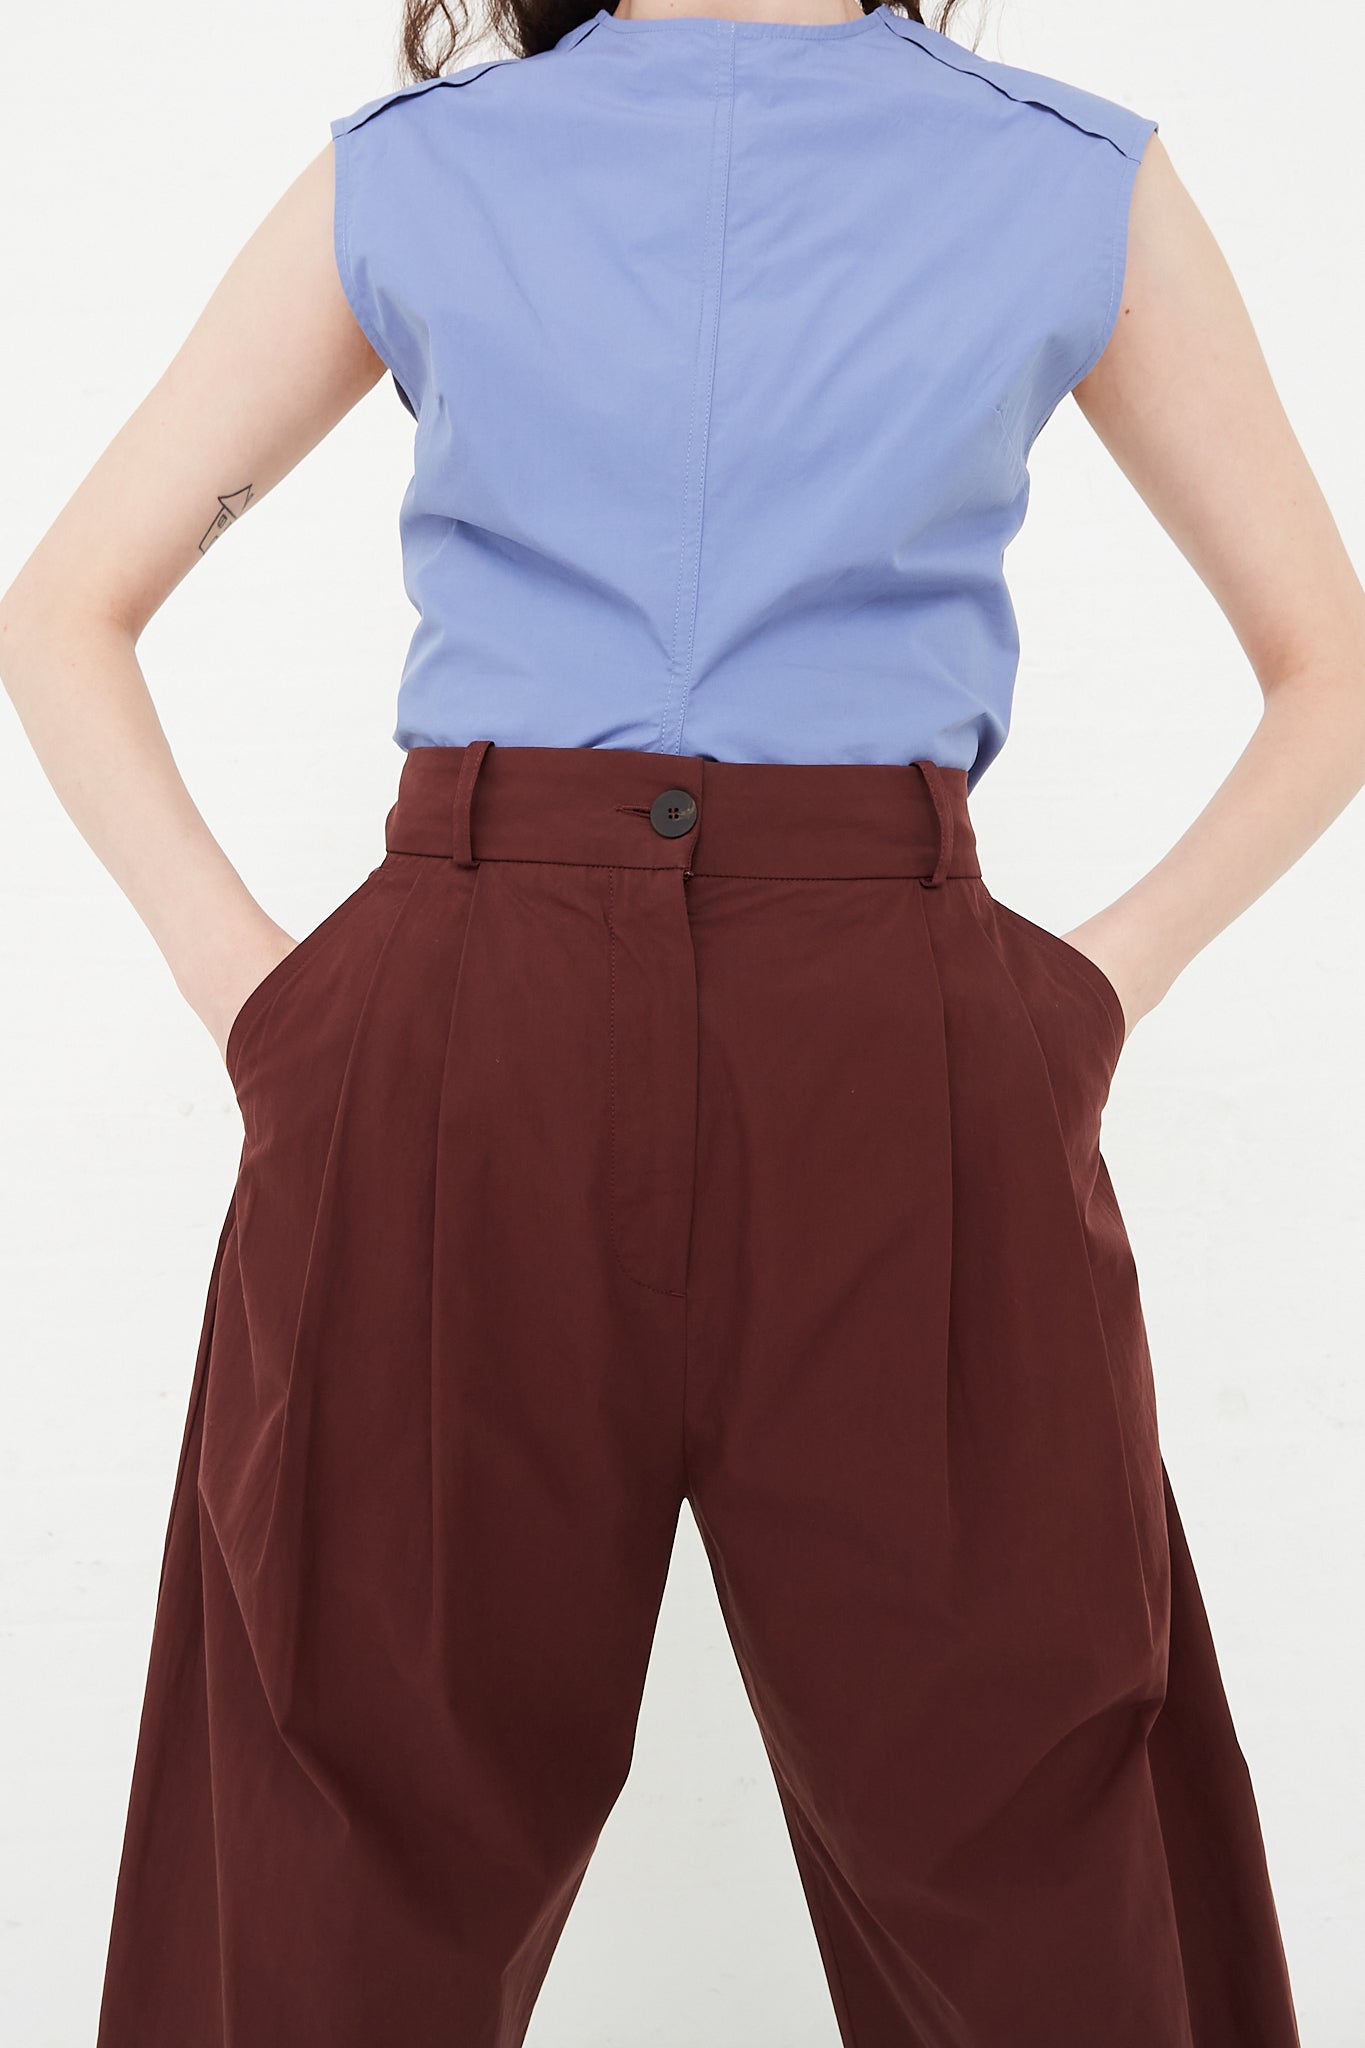 Studio Nicholson Acuna Pant in Compote front detail